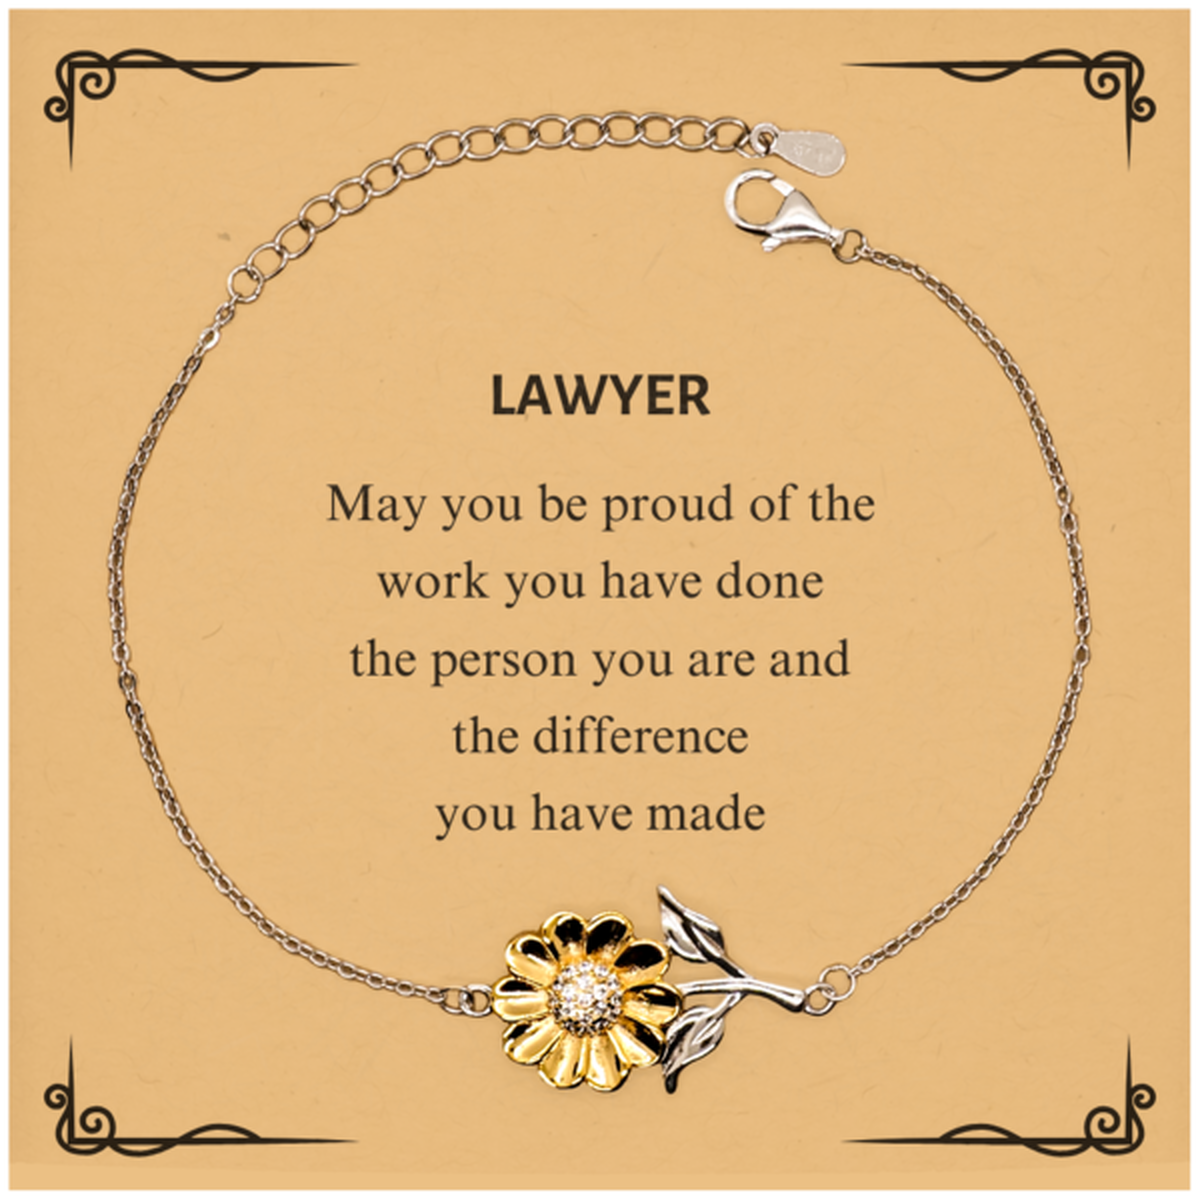 Lawyer May you be proud of the work you have done, Retirement Lawyer Sunflower Bracelet for Colleague Appreciation Gifts Amazing for Lawyer